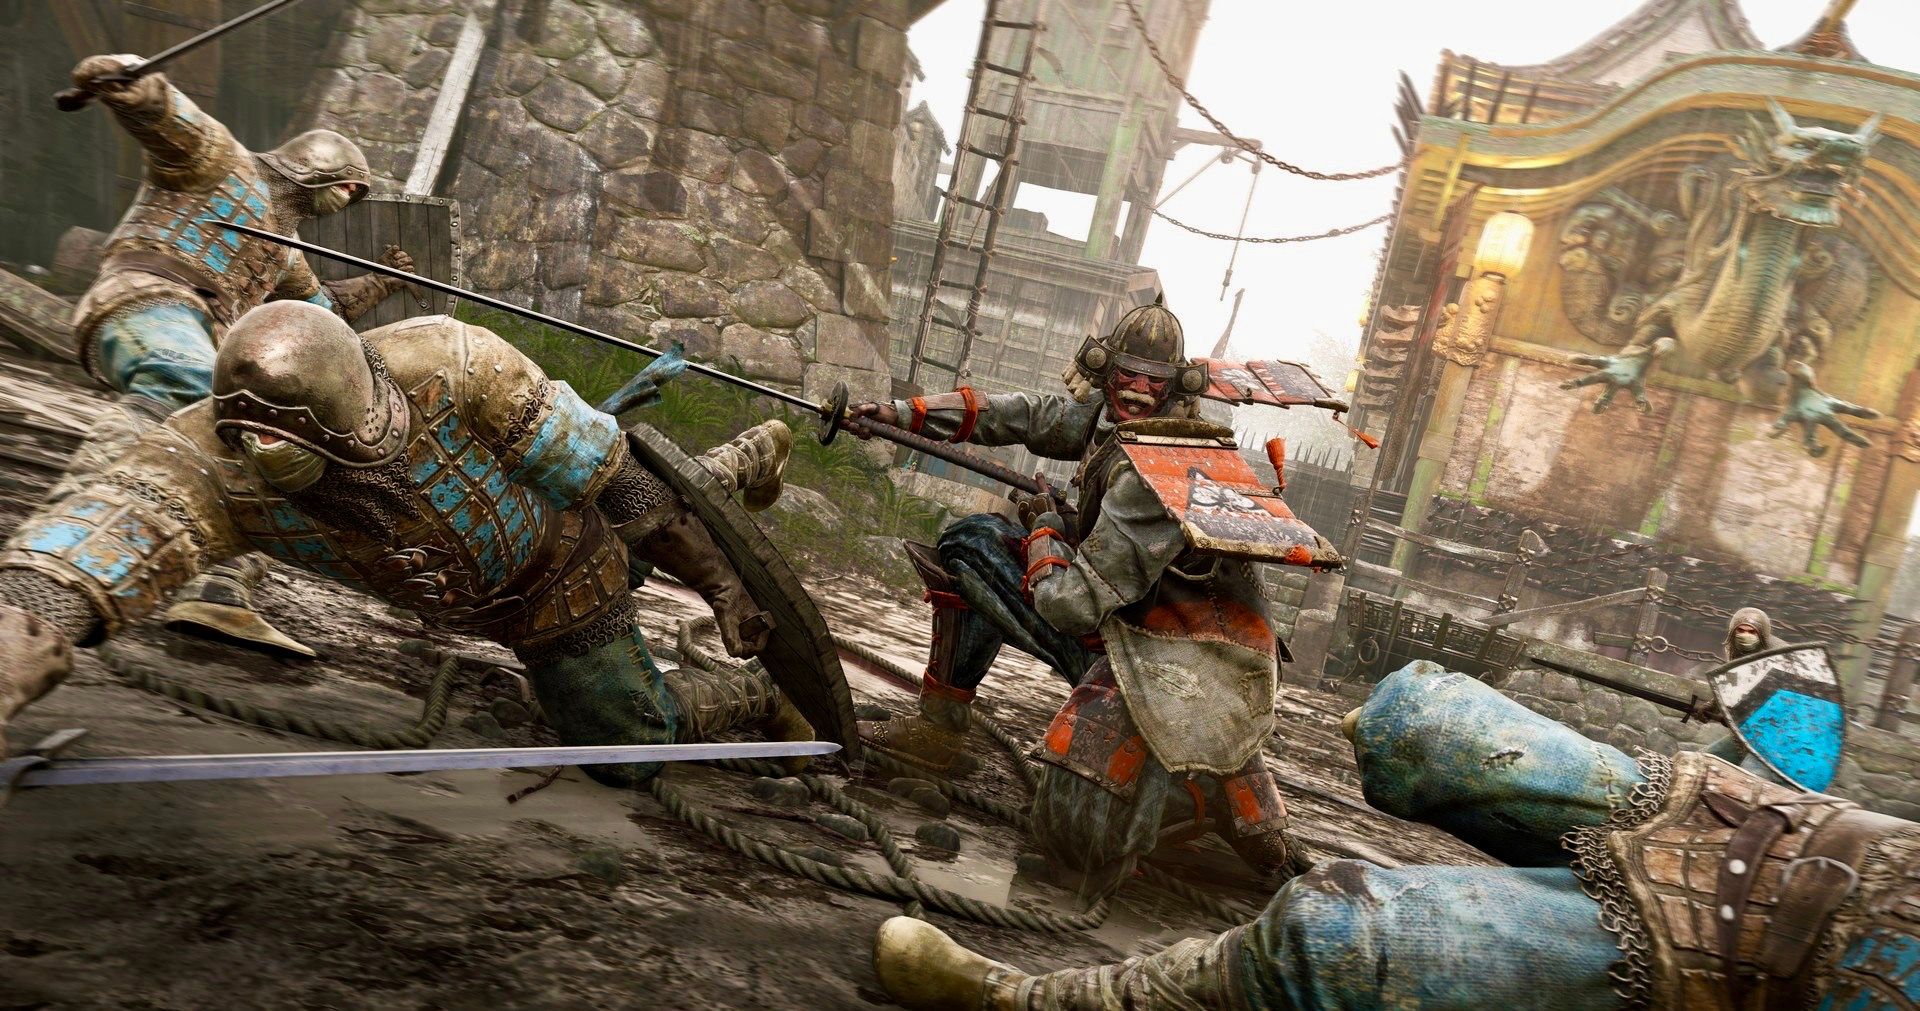 Regenboog Druipend Onverbiddelijk For Honor Will Be Free To Play On PS4, Xbox One & PC This Weekend